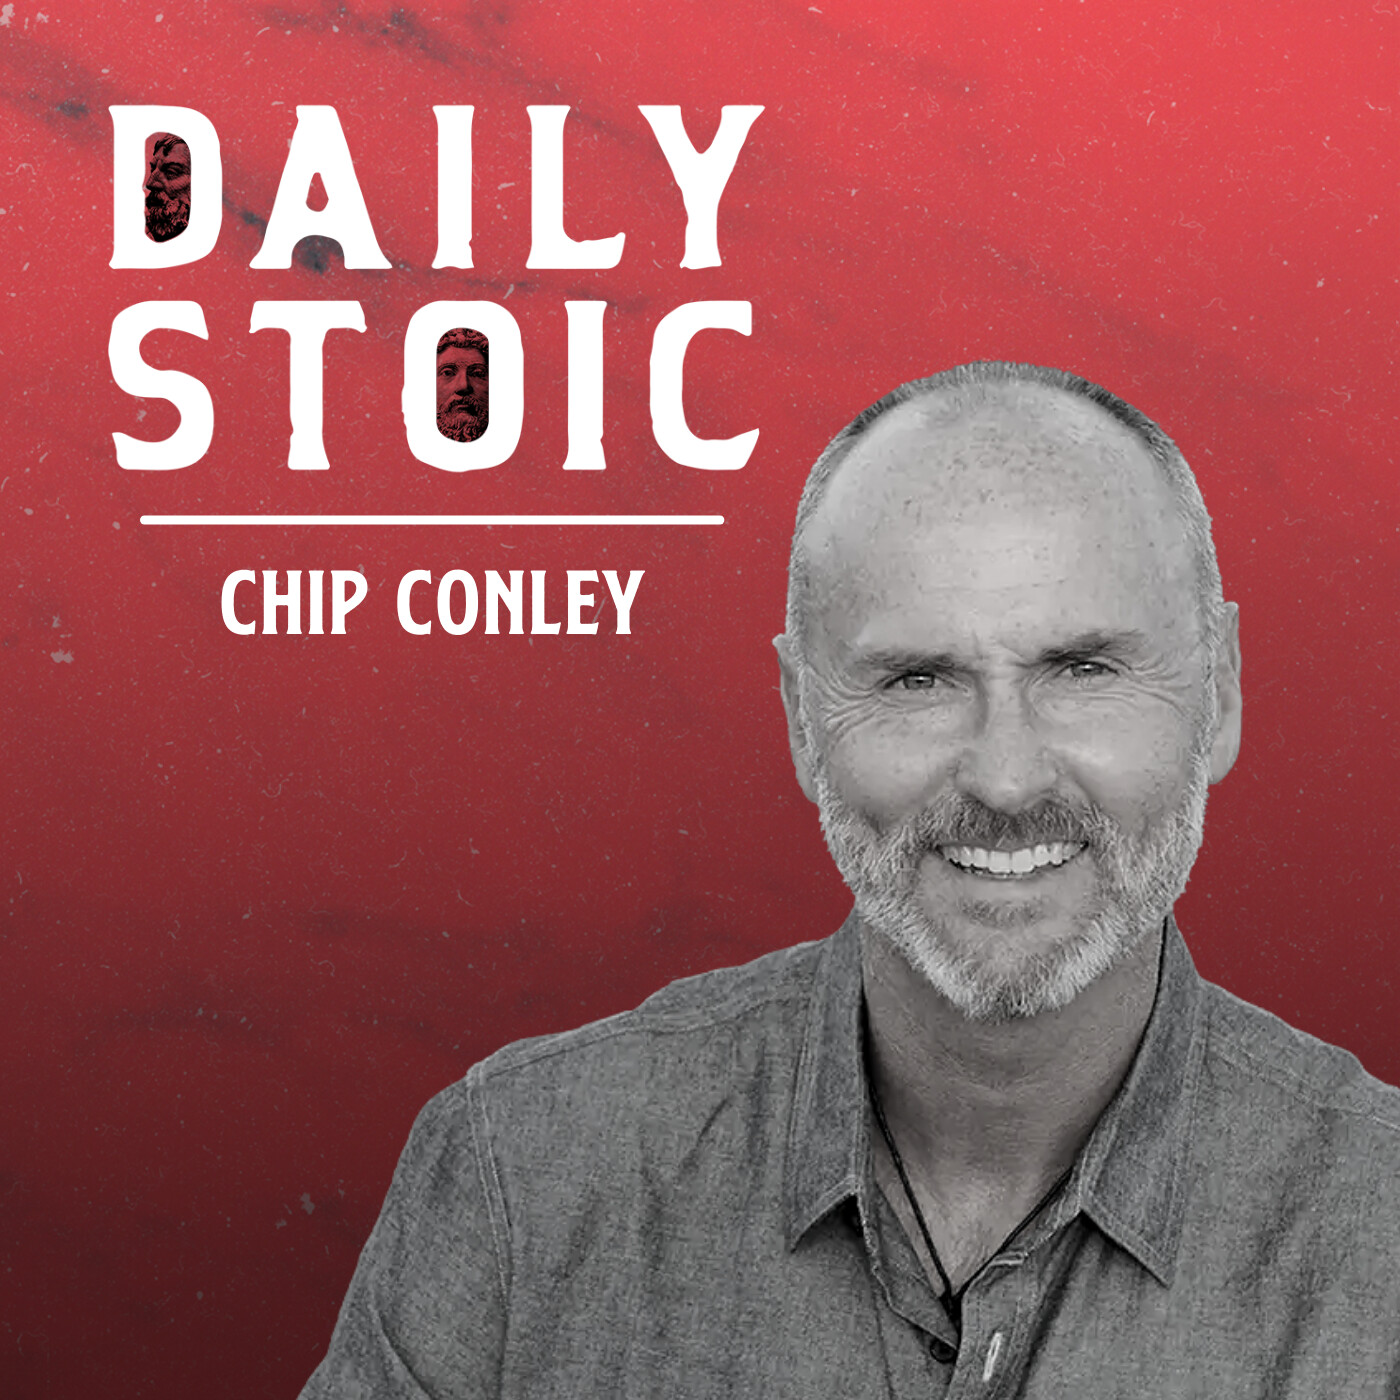 Chip Conley on Finding Contentment and Embracing Our Achievements